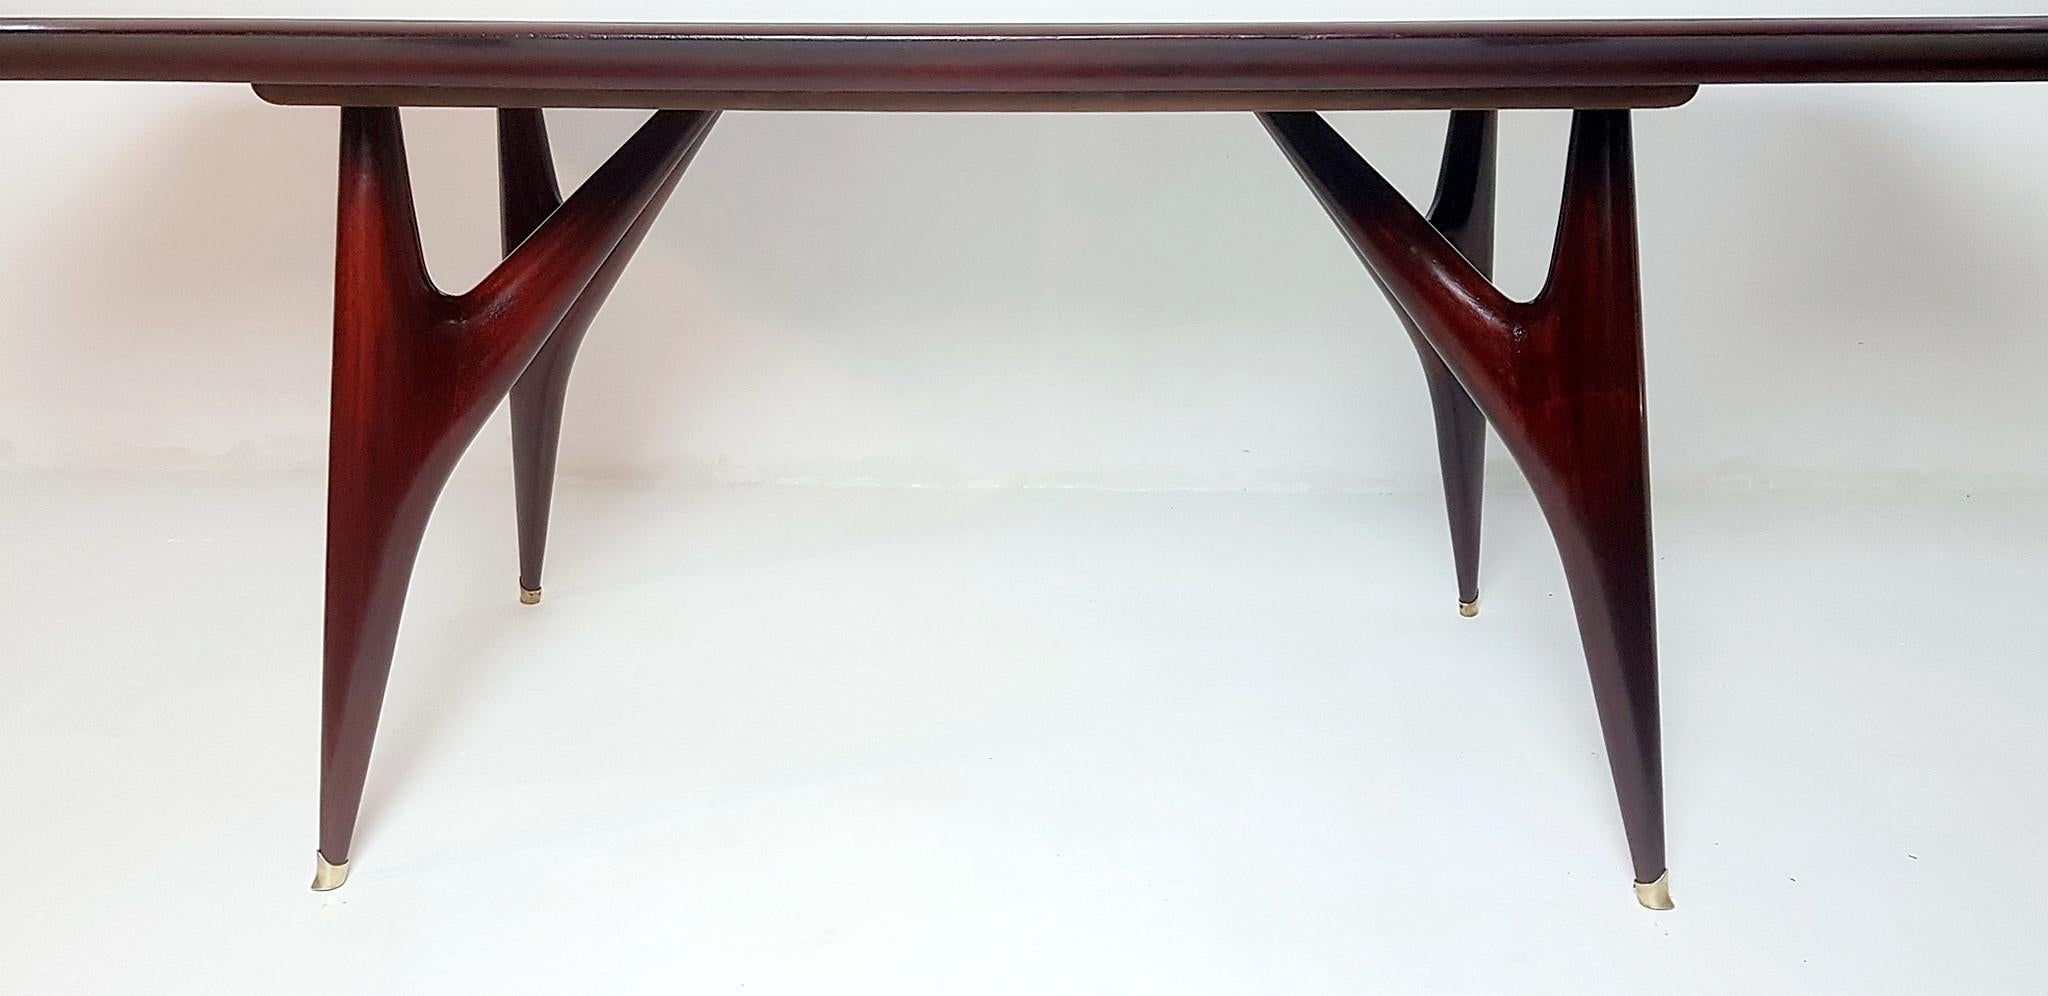 Fabulous large professionally restored dining table produced in Italy in the 1950s. The base is made in walnut and the legs has brass caps and finally the top which has an angular shape is made from glass which has a pale green/turquoise vivid